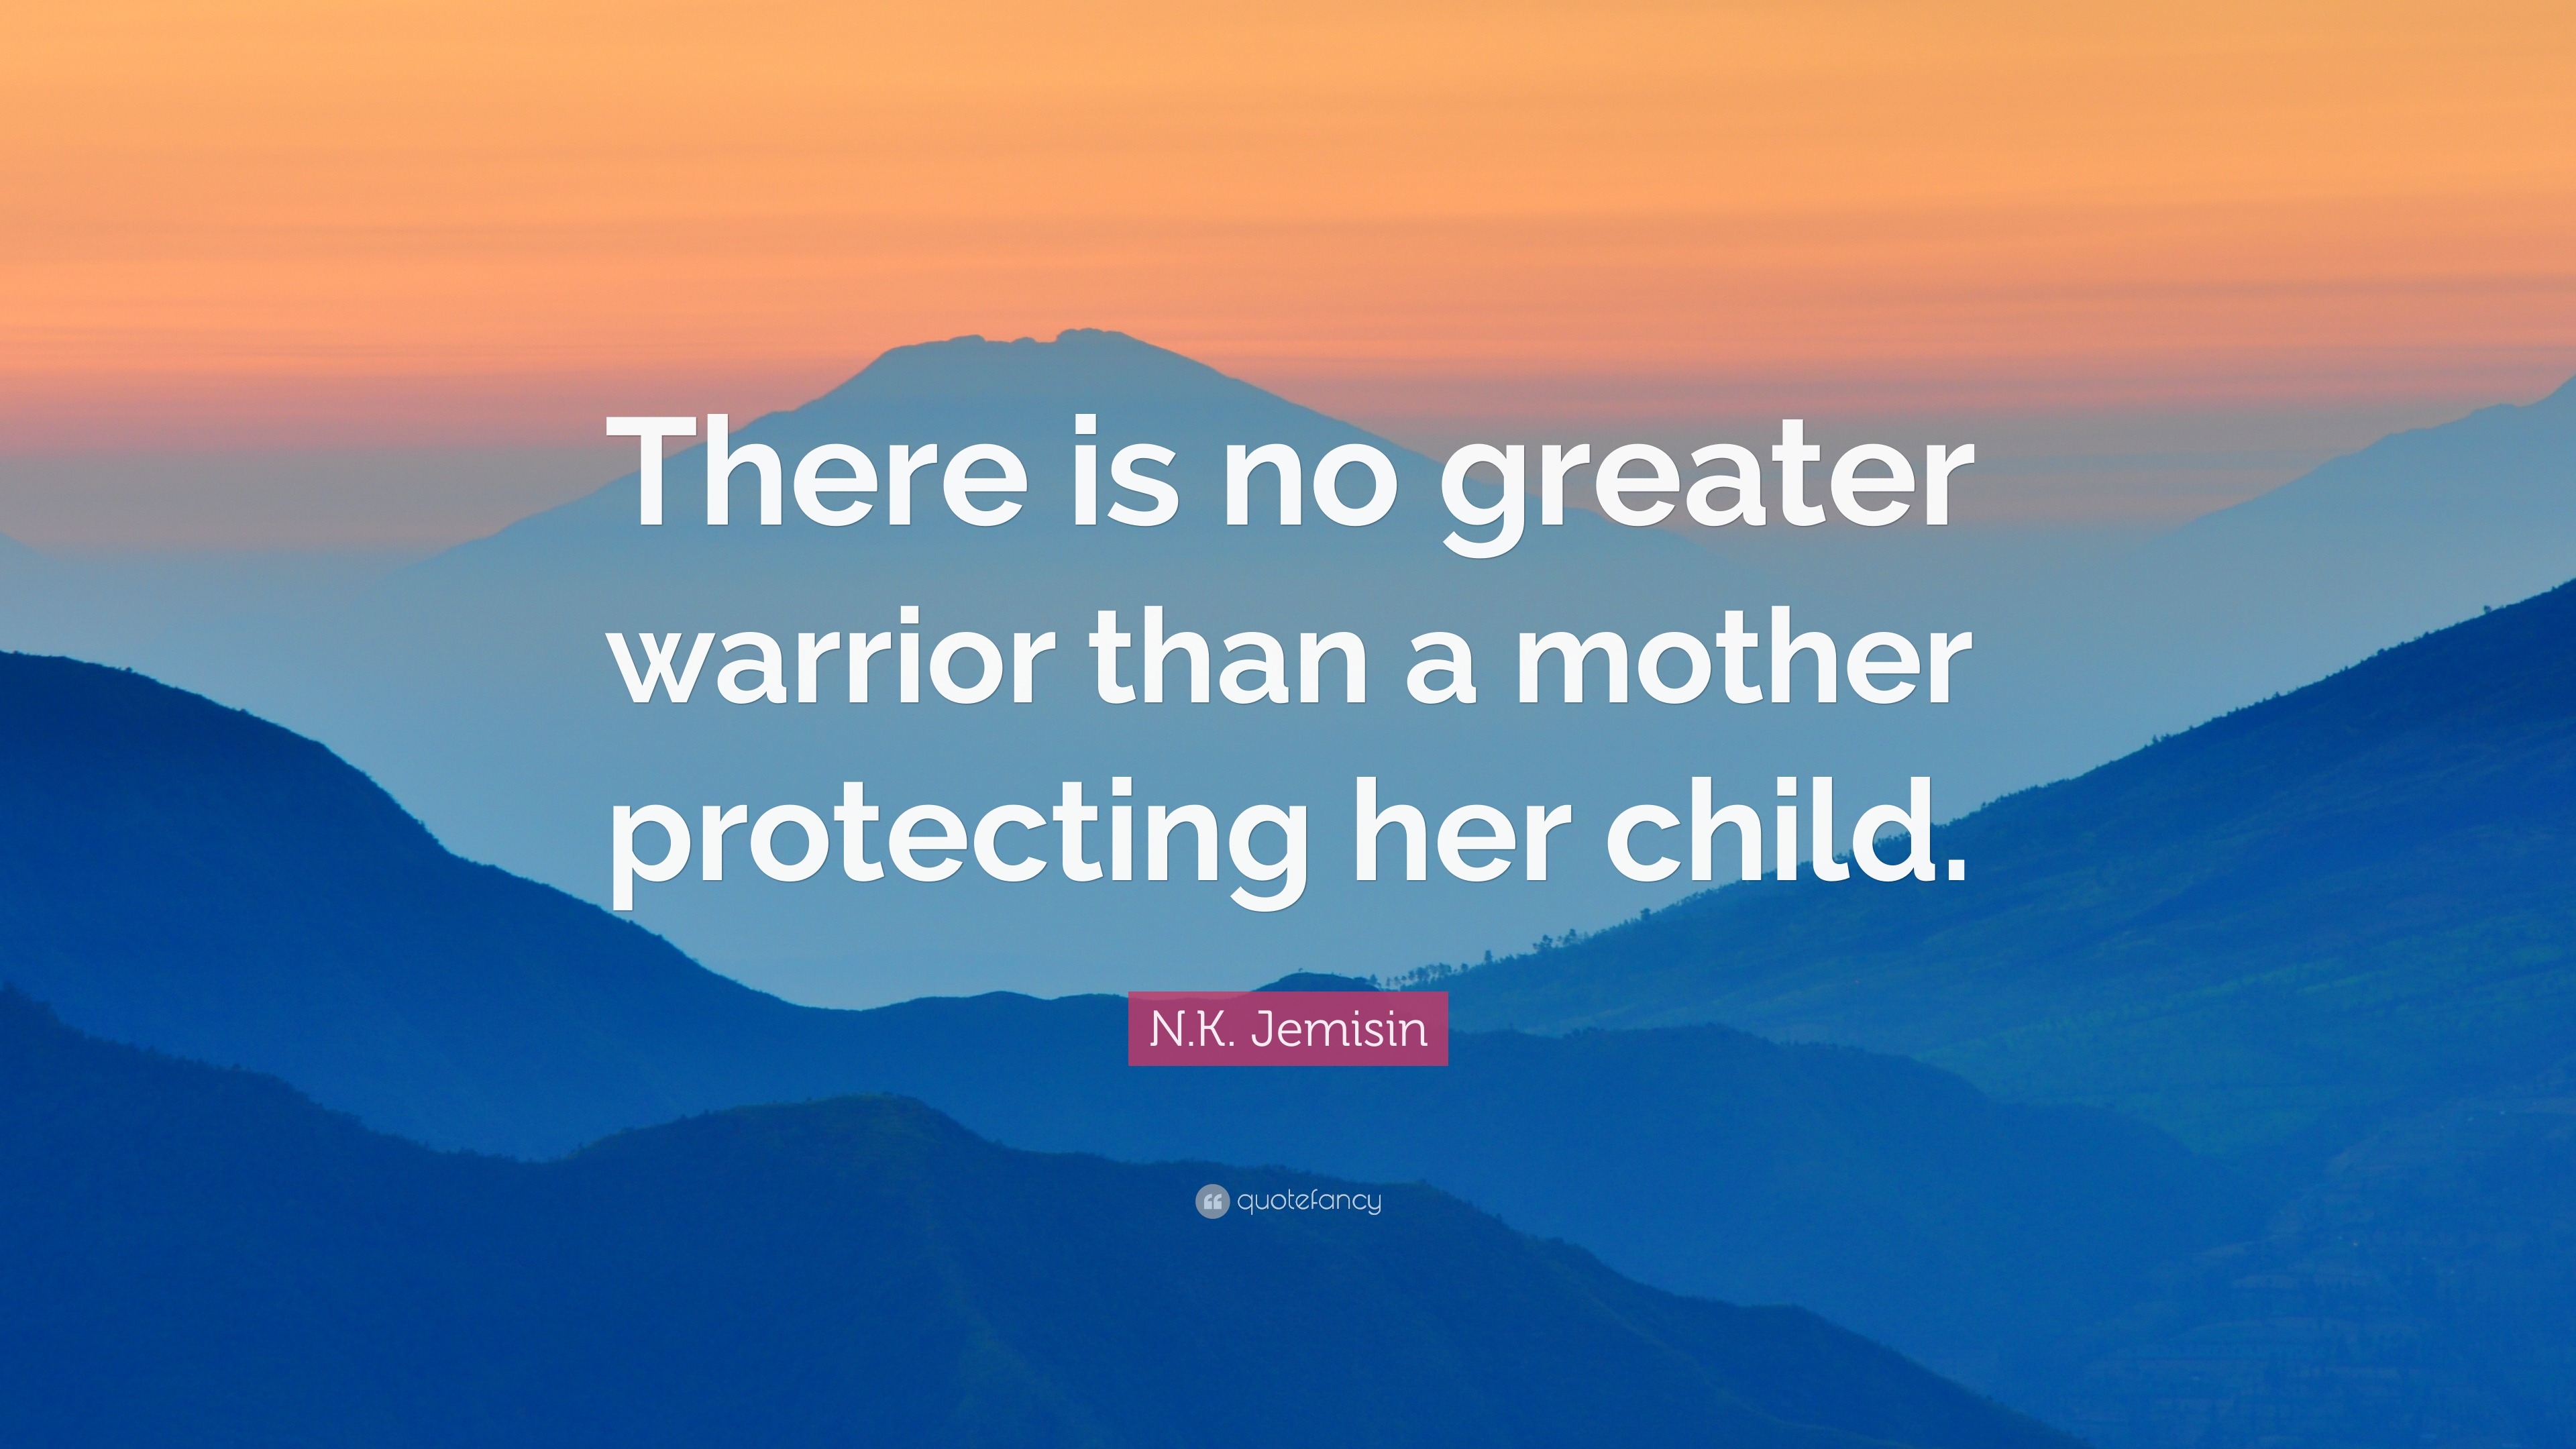 N.K. Jemisin Quote: “There is no greater warrior than a mother